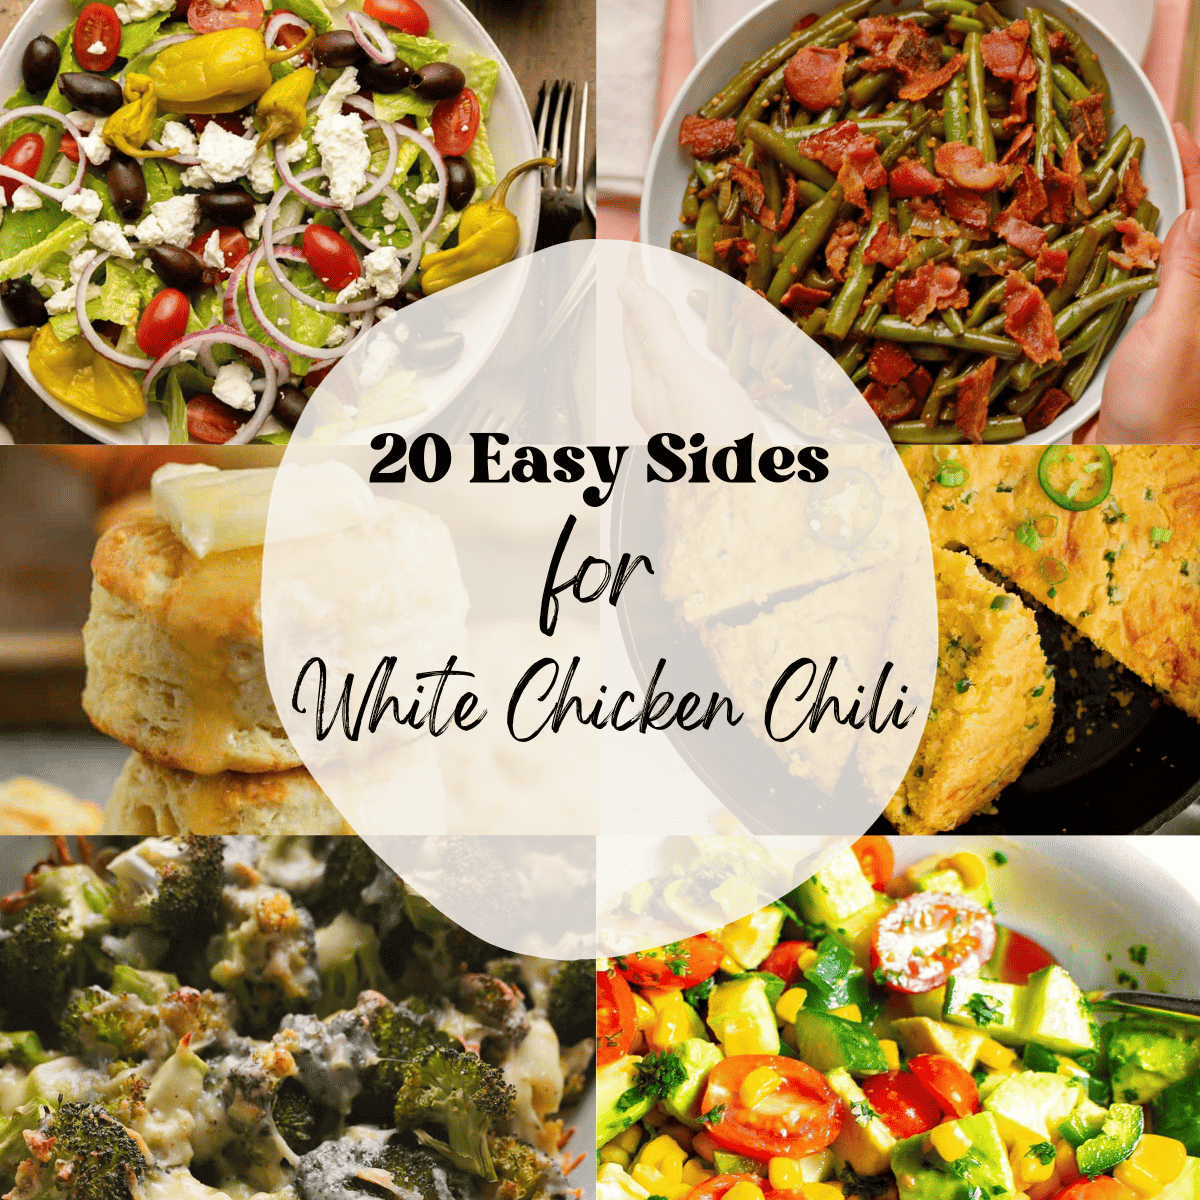 A 6 photo collage showing easy side dishes for white chicken chili. 